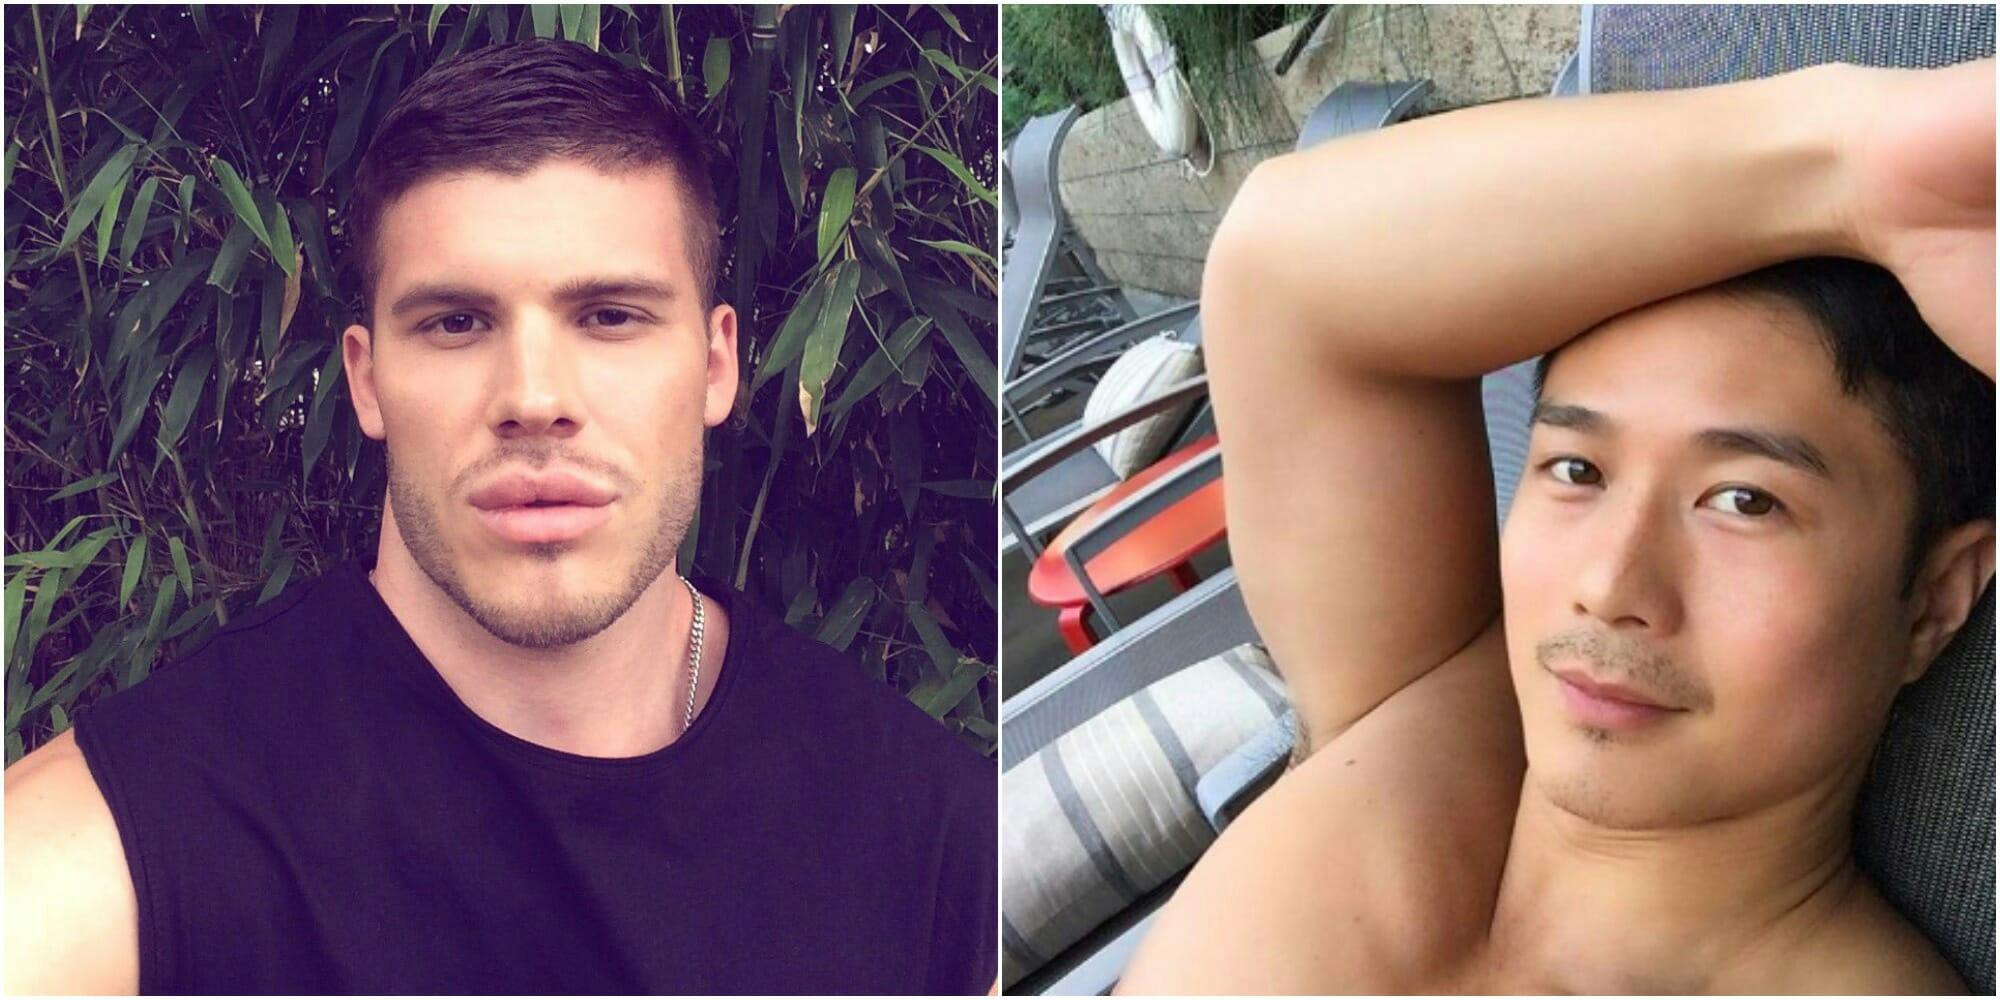 19 gay porn stars you’ll want to follow on Twitter